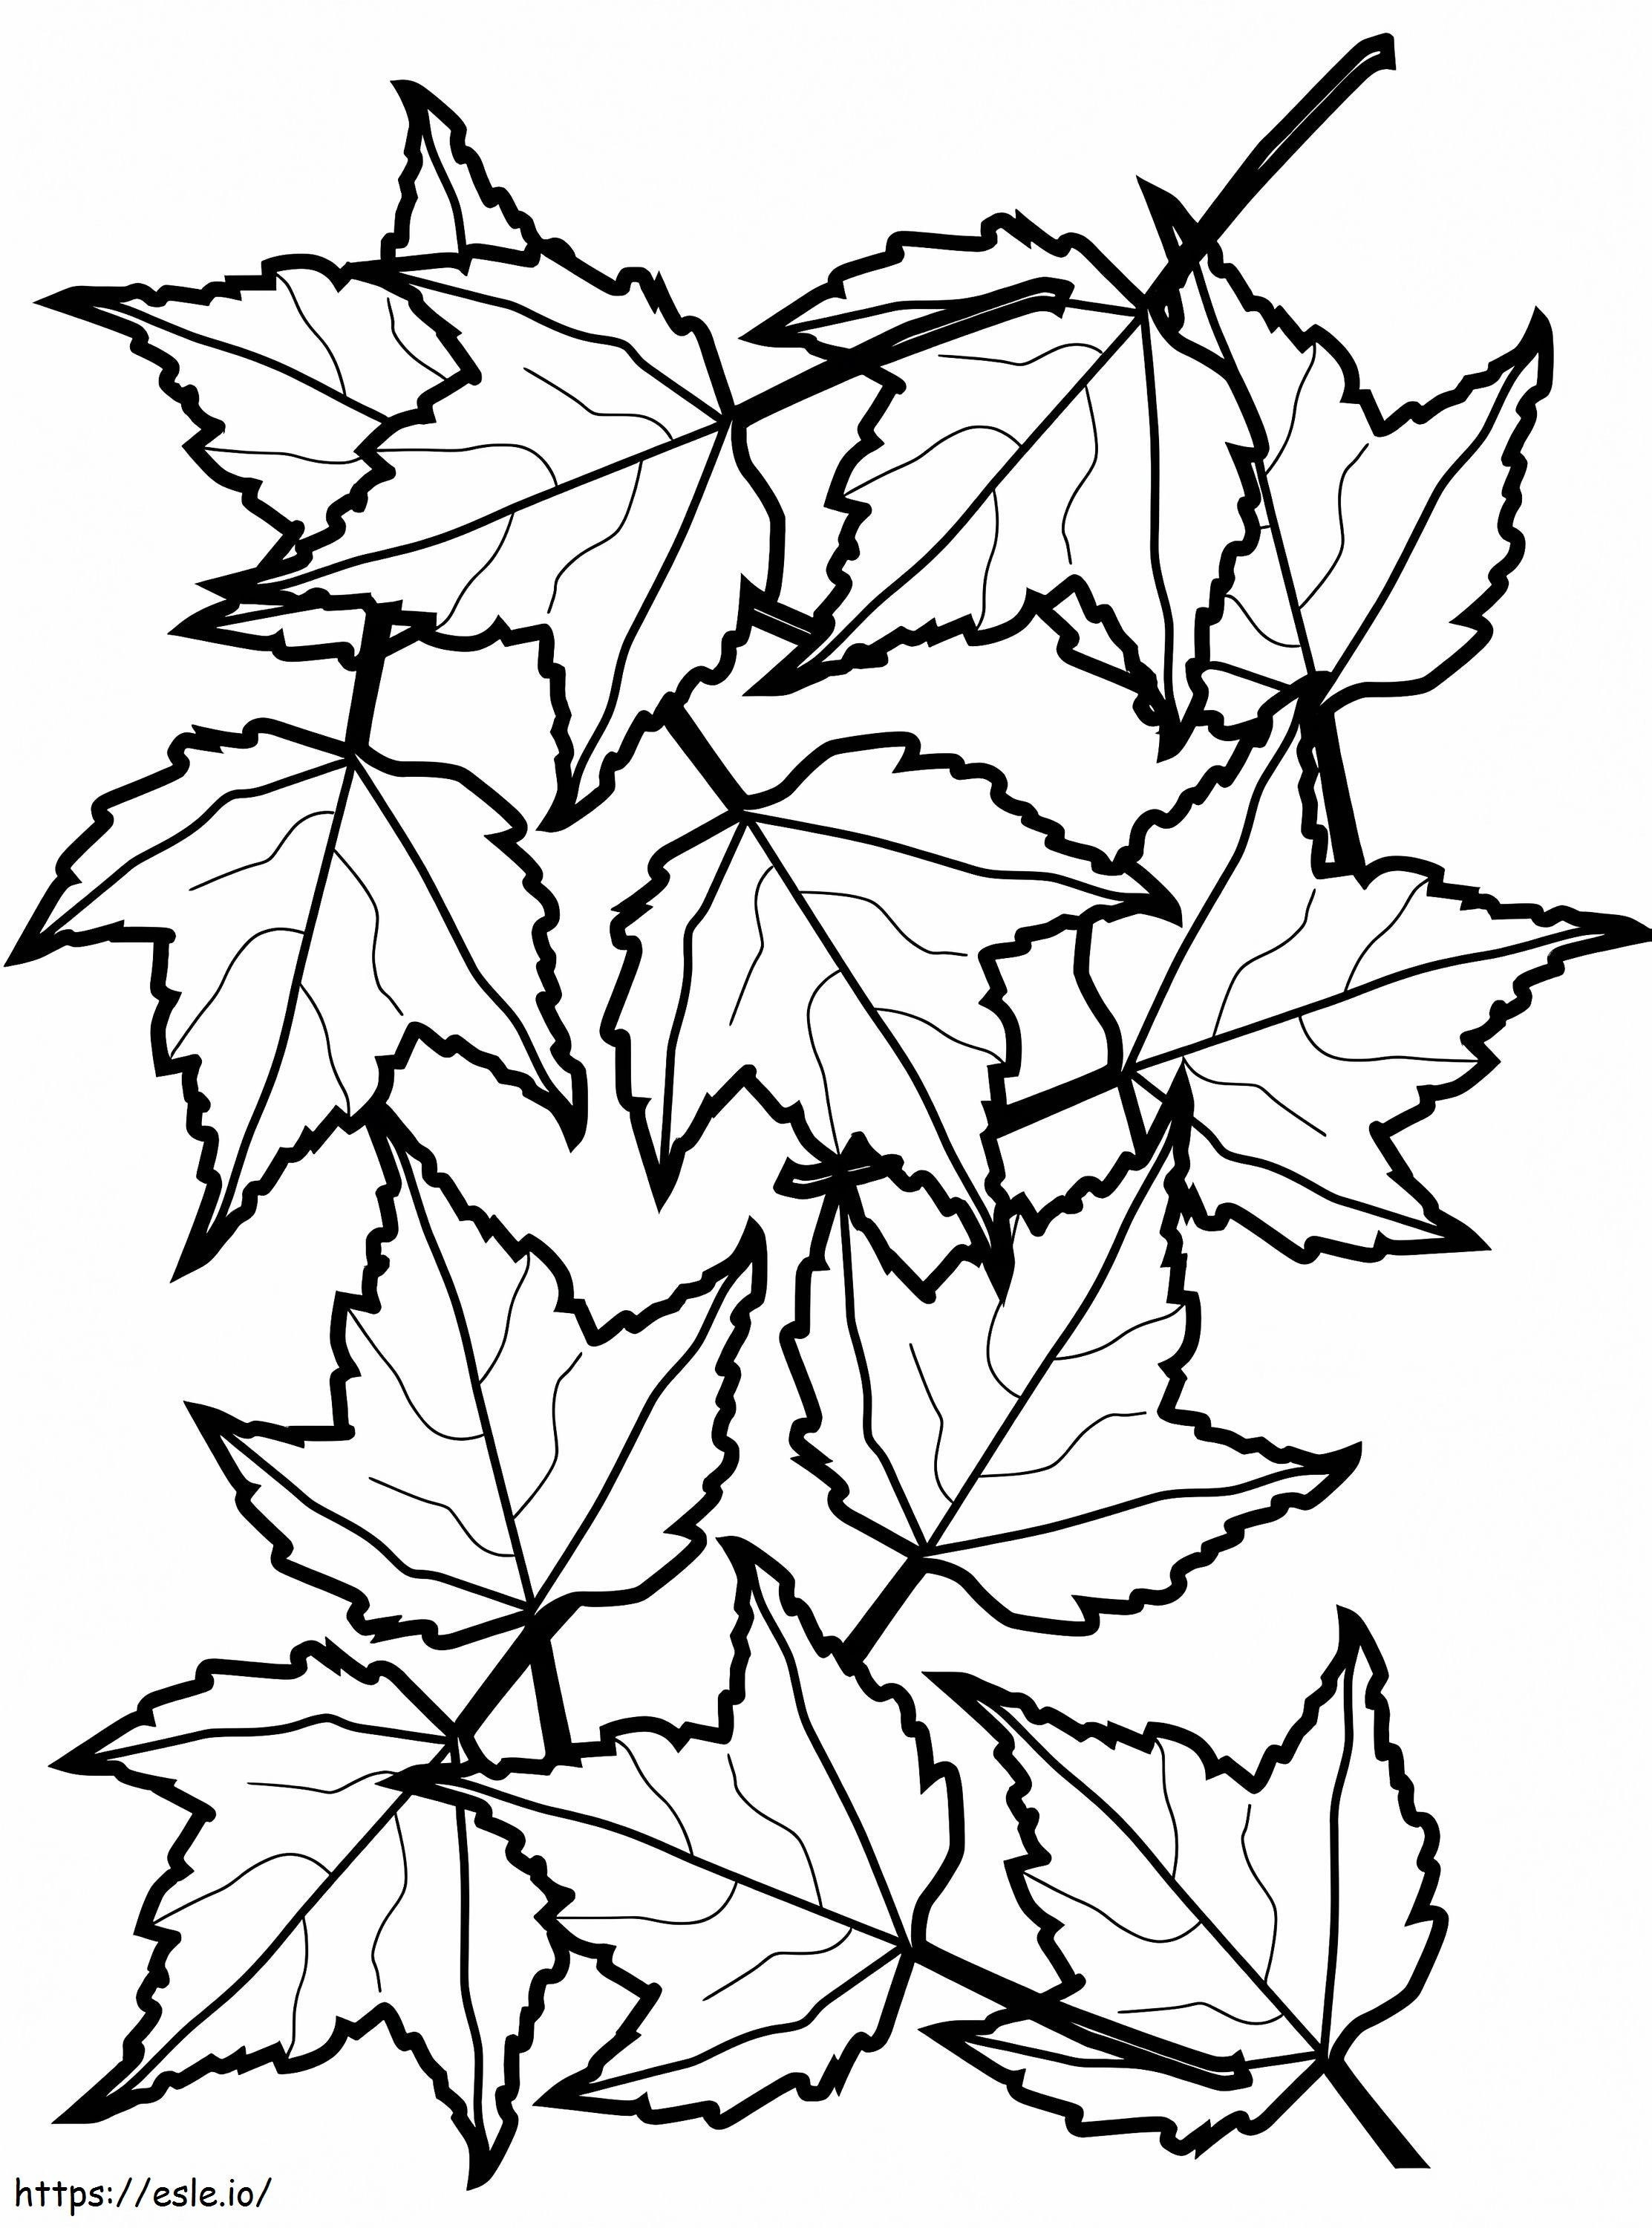 Autumn Maple Leaves coloring page